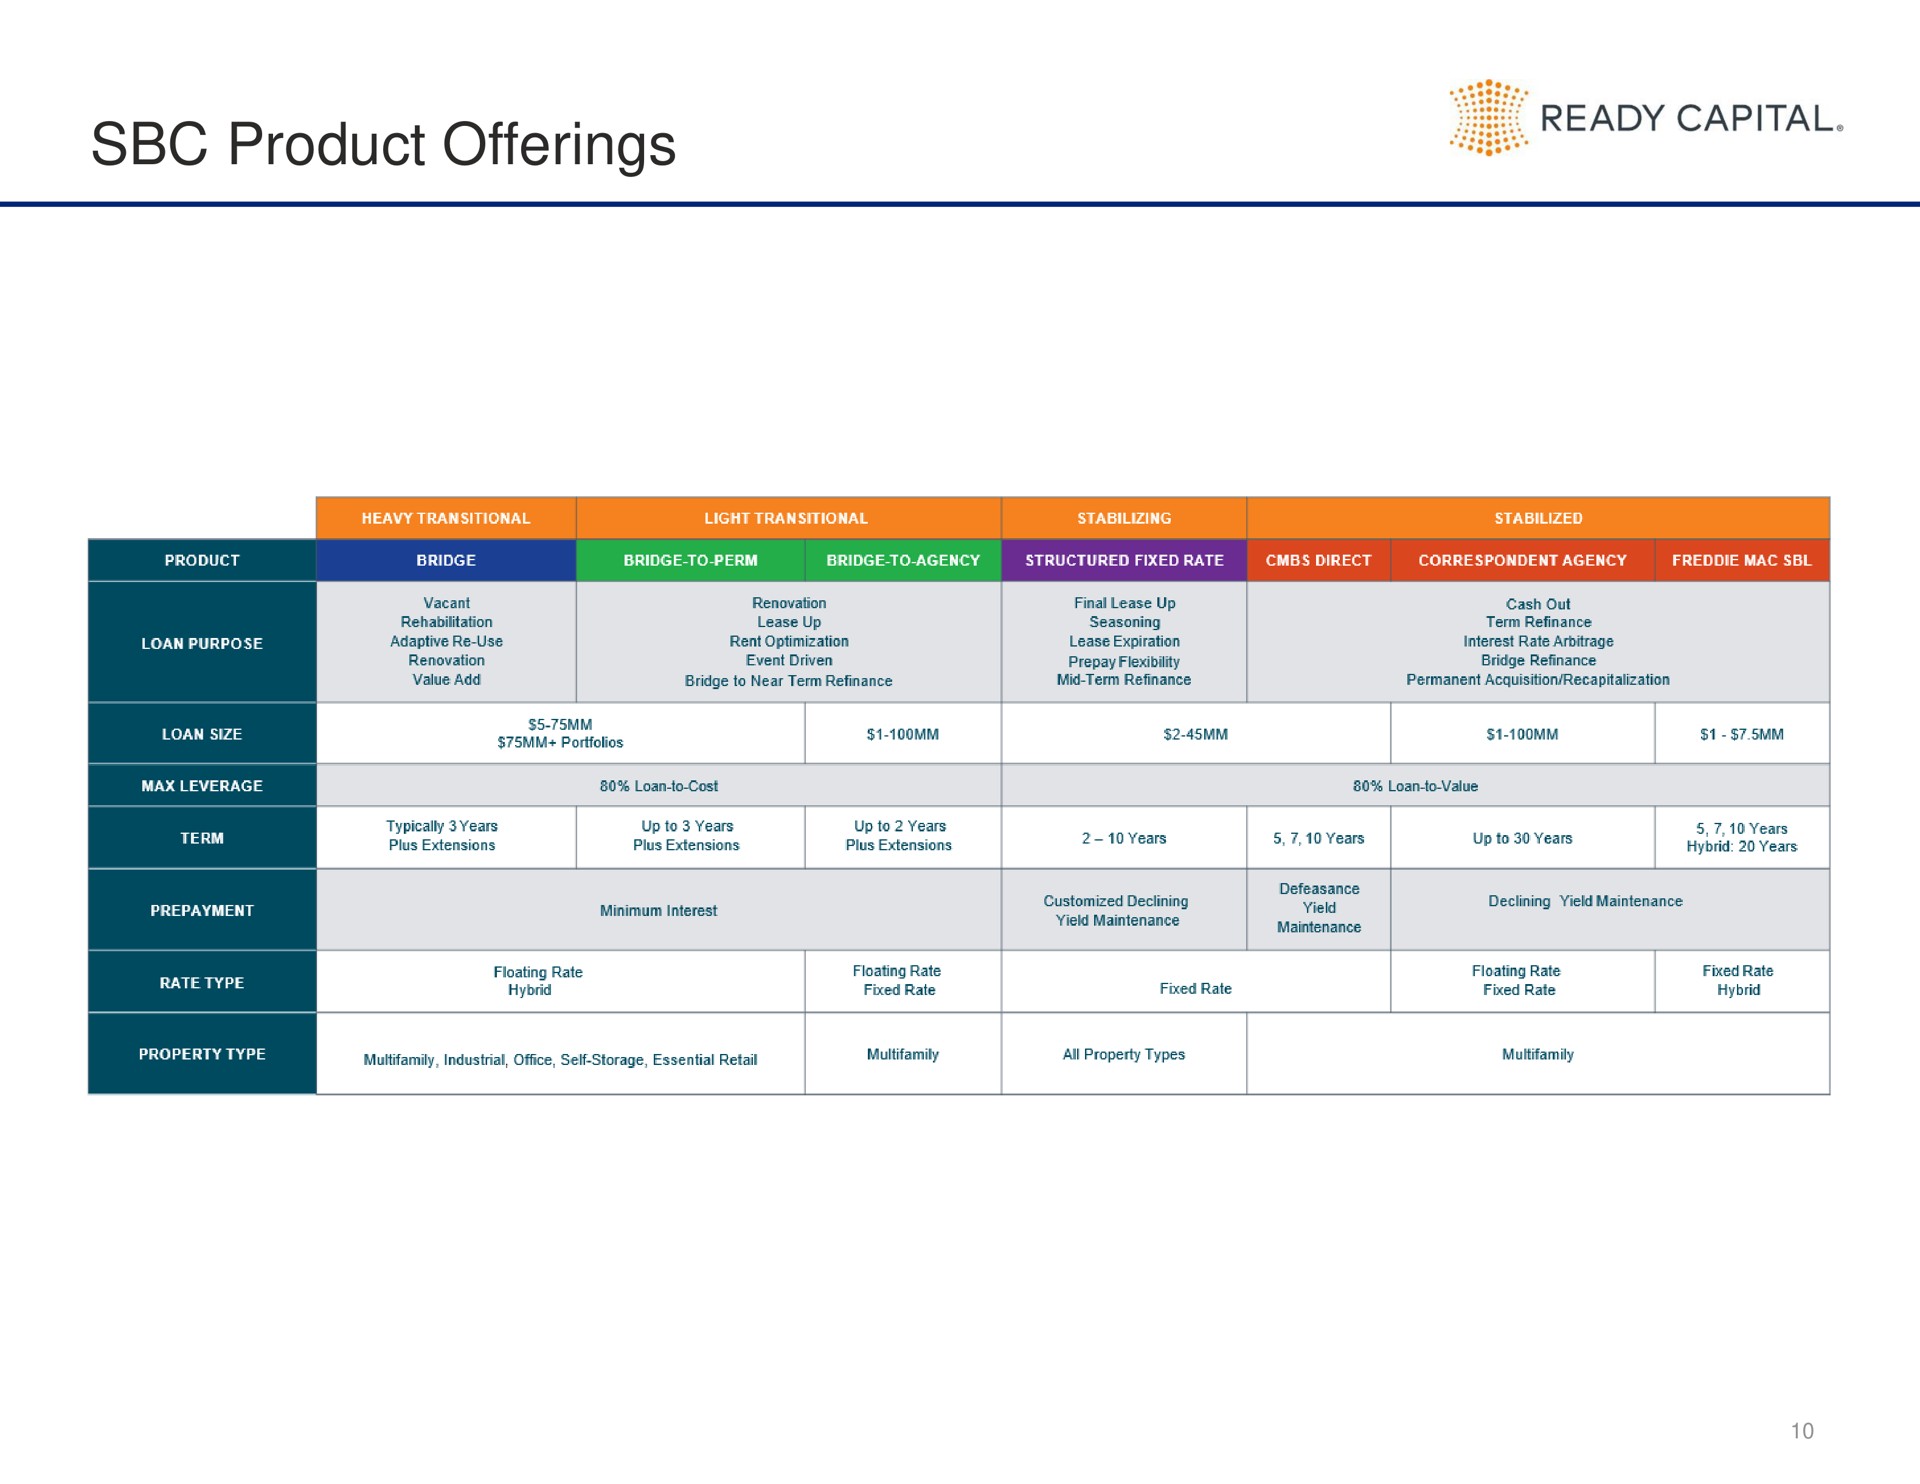 product offerings ready capital | Ready Capital